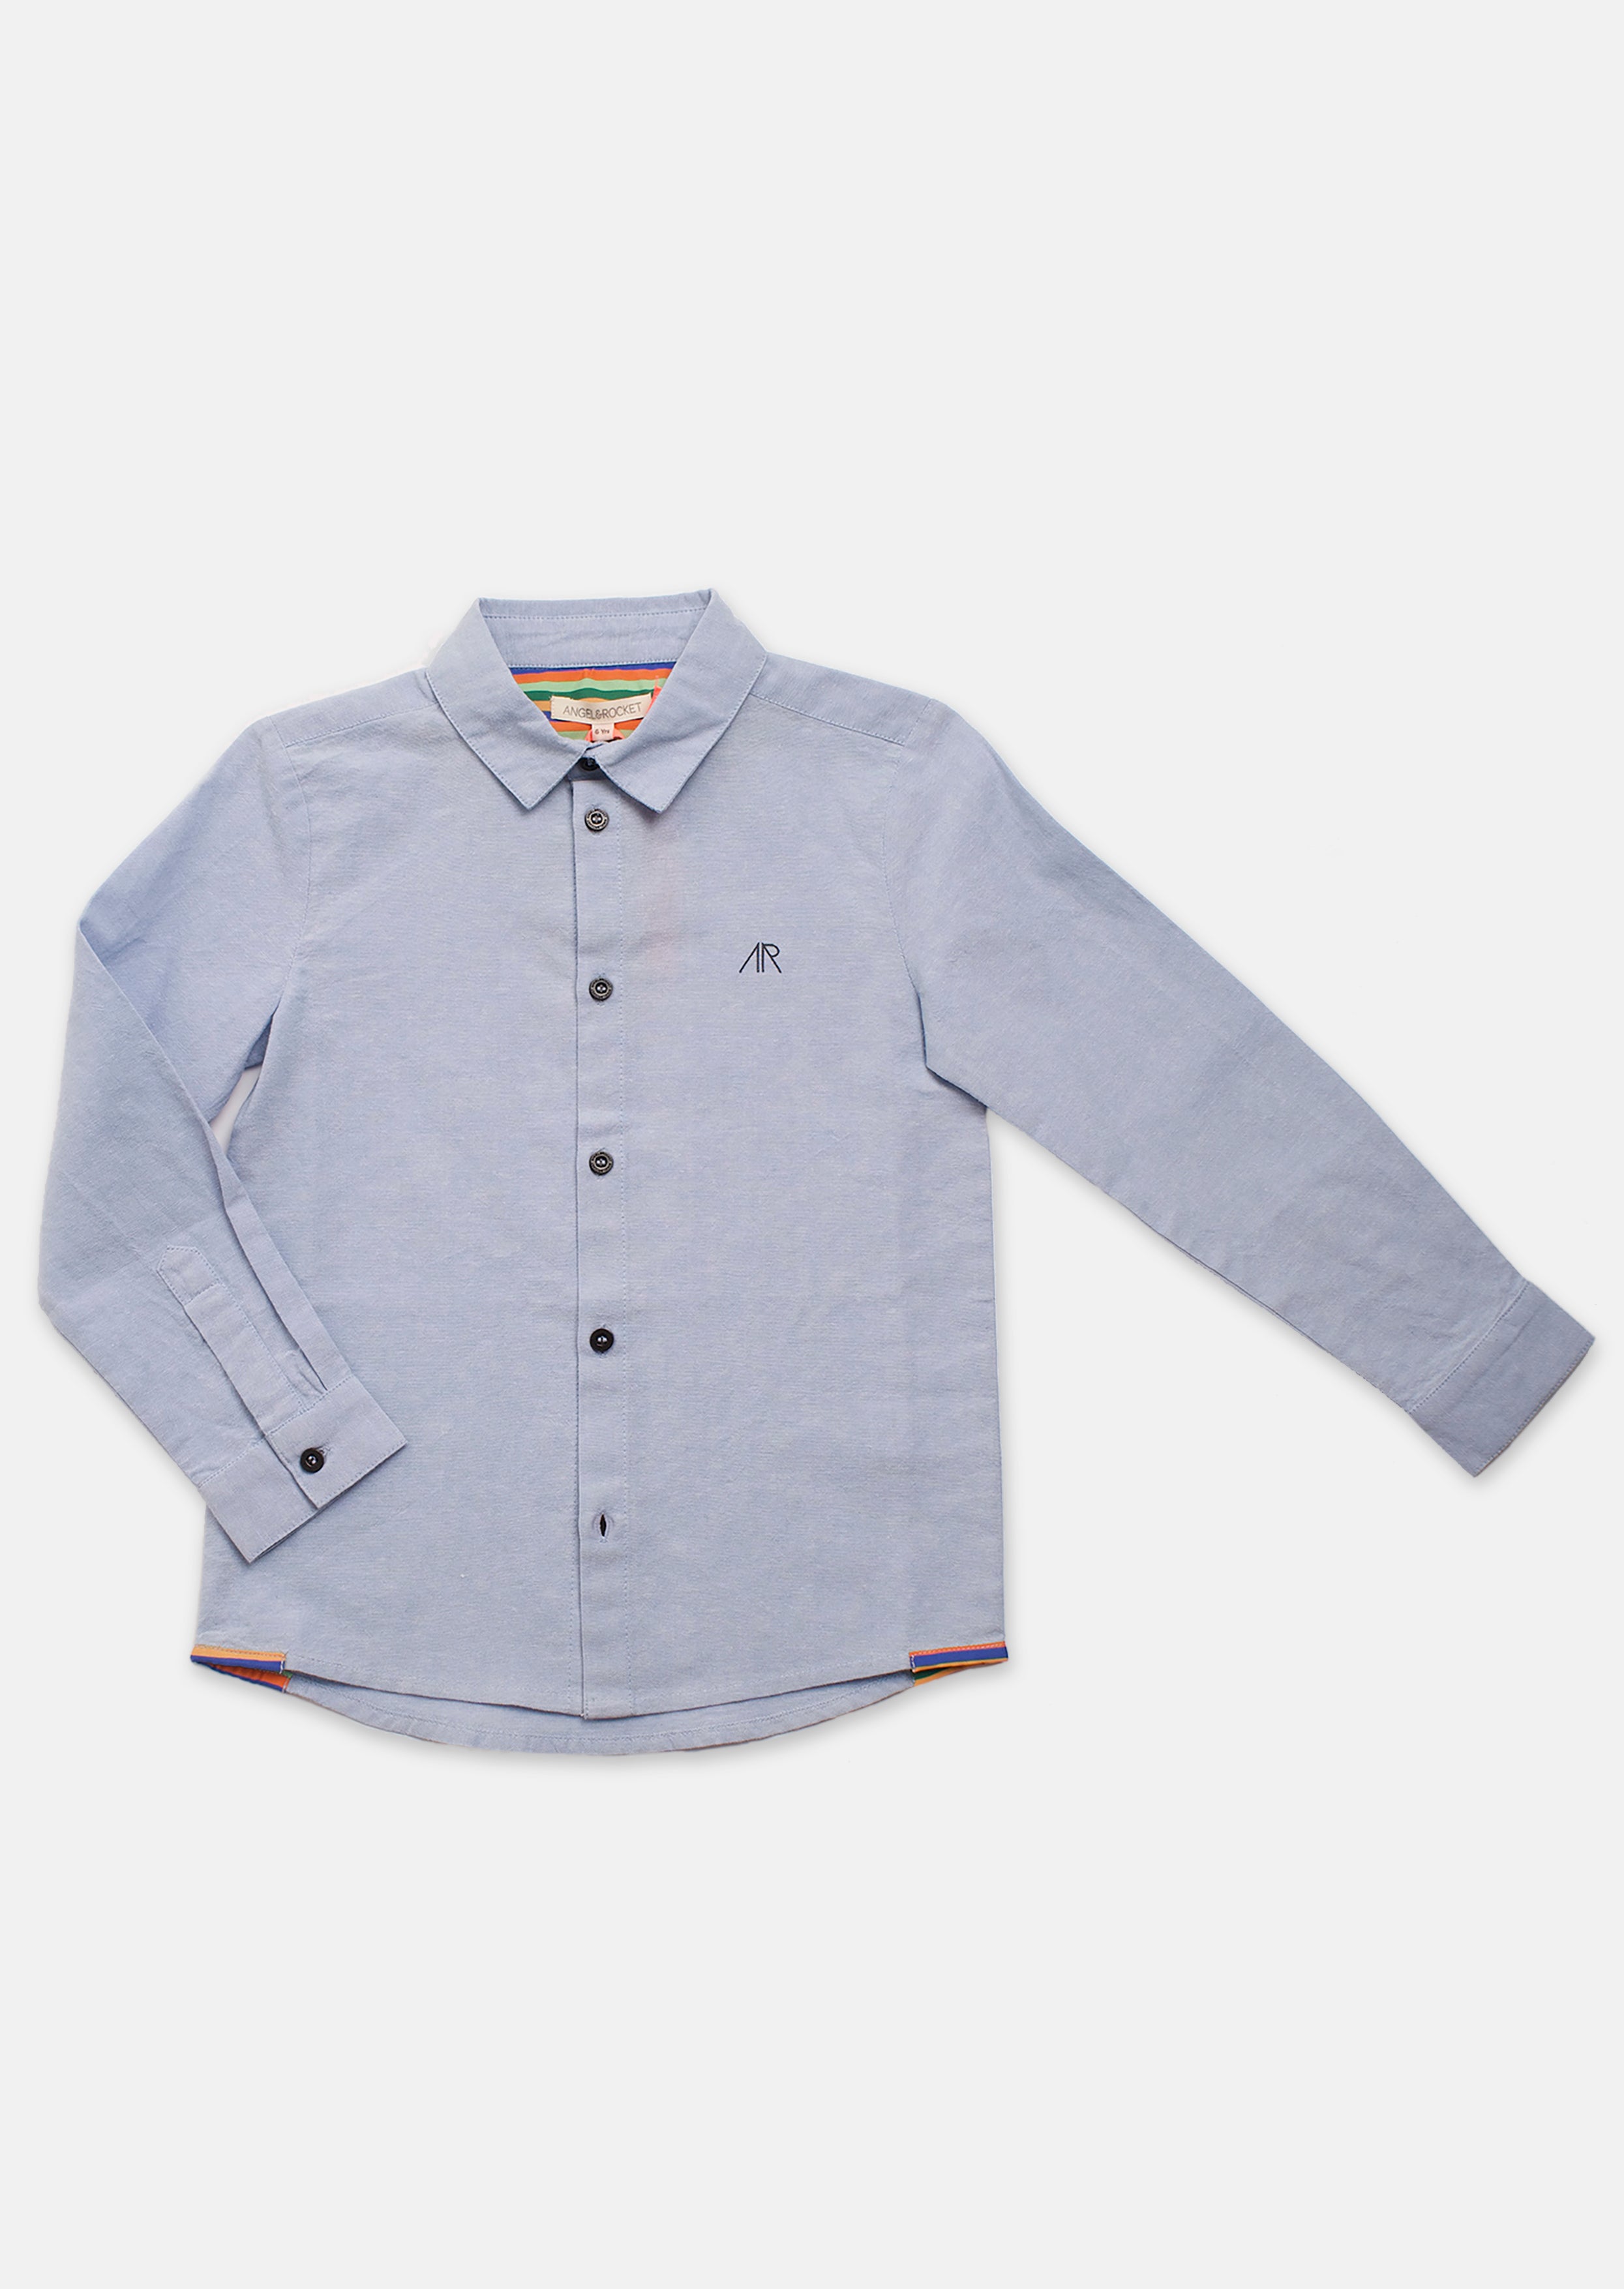 Boys Full Sleeves Cotton Solid Blue Shirt